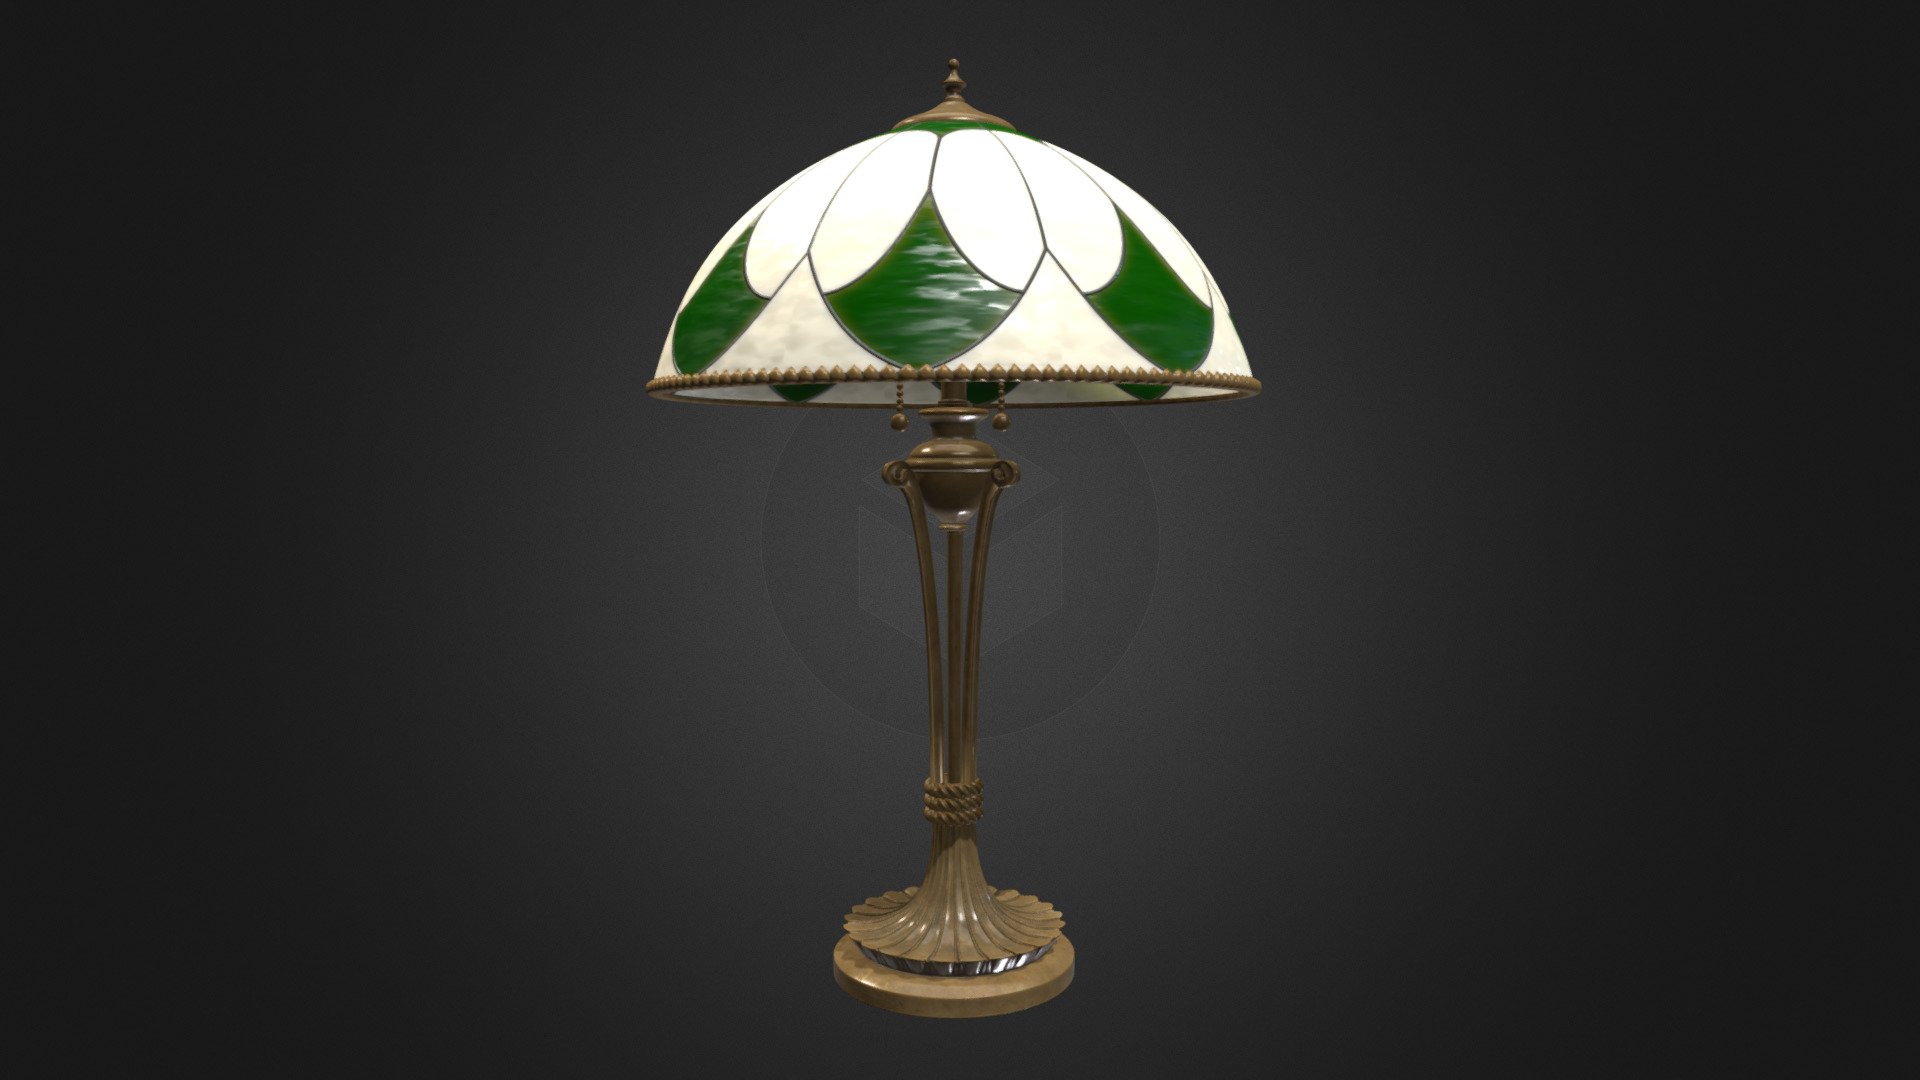 This antique table lamp is an acurate scale representation of an actual victorian peice. It is well suited to stage any scene requiring light fixtures of it’s period. At 295,284 all quad faces, this truly high poly mesh captures every graceful curve and rigid corner. It’s 2K PBR material set preserves detail while maintaining efficient memory usage.

Your purchase includes an OBJ and all PBR maps, a Blend file of the lamp to allow for further material manipulation, as well as a FREE lightbulb Blendfile. All texture files are distributed under a CC0 license.

A low poly version of this model can be found here: https://skfb.ly/6SrNx - Antique Table Lamp 001 (High Poly) - Buy Royalty Free 3D model by Karl Beiler (@ArtOfKarlB) 3d model